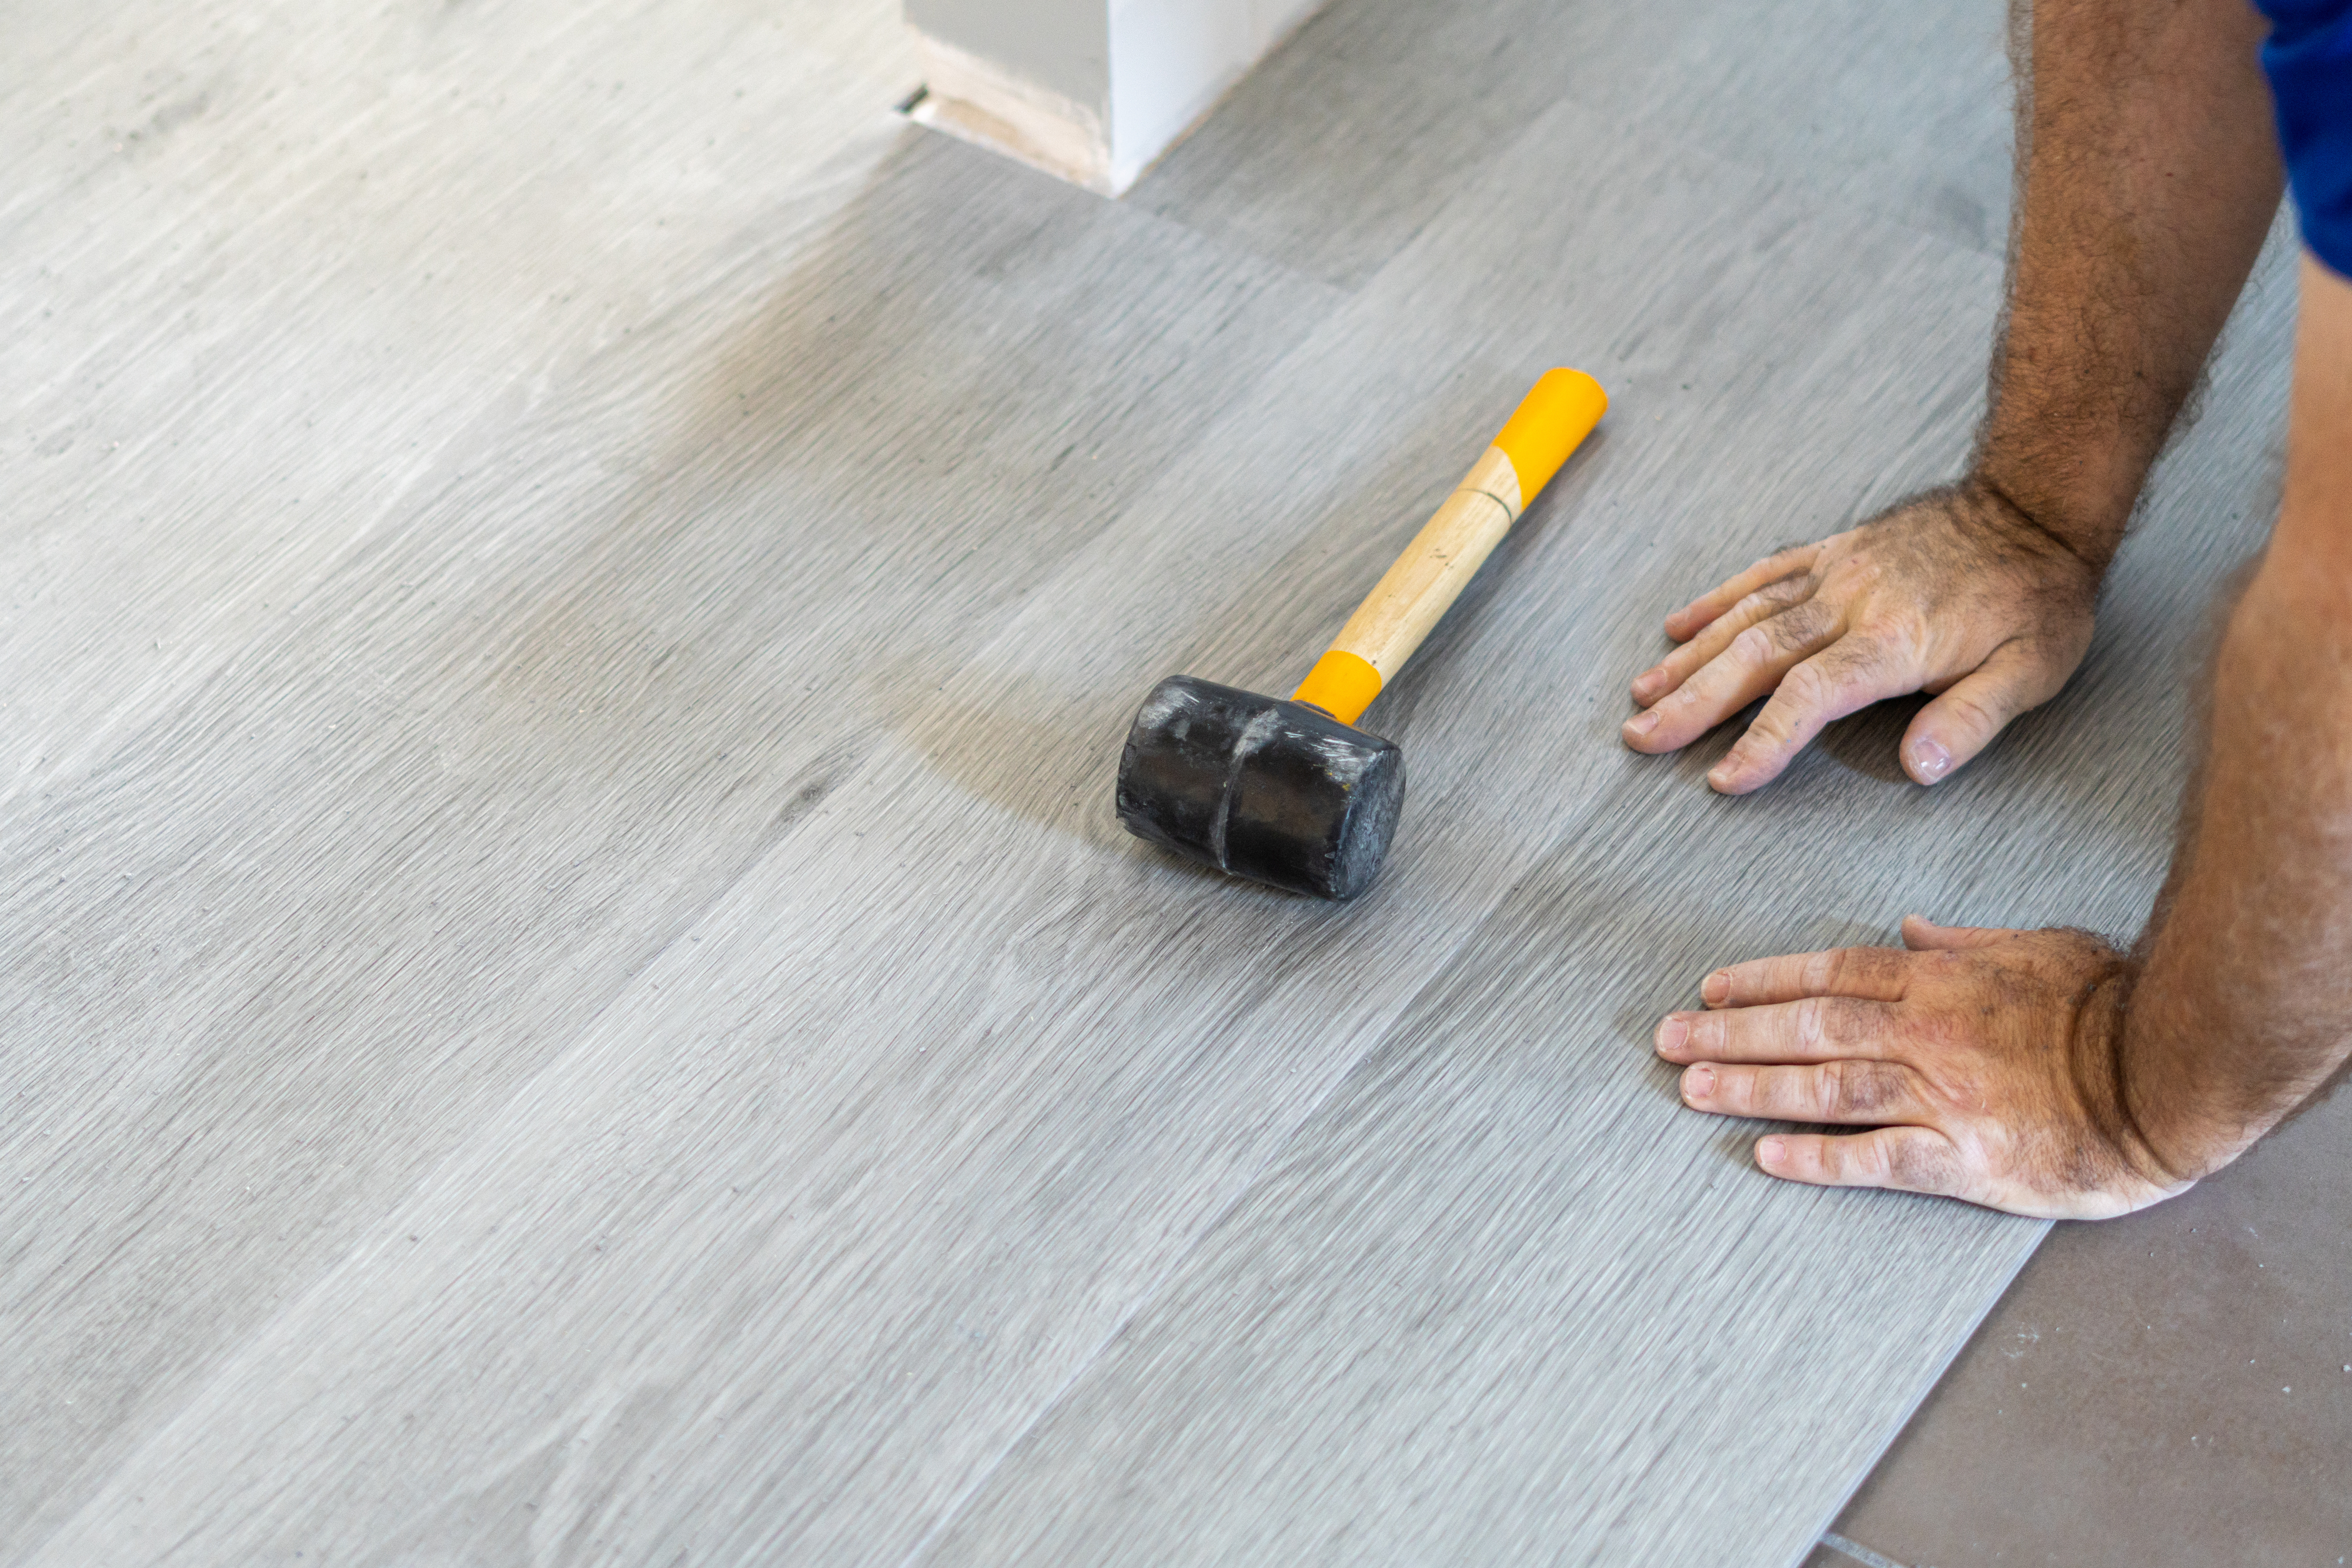 Person installing flooring with a mallet nearby